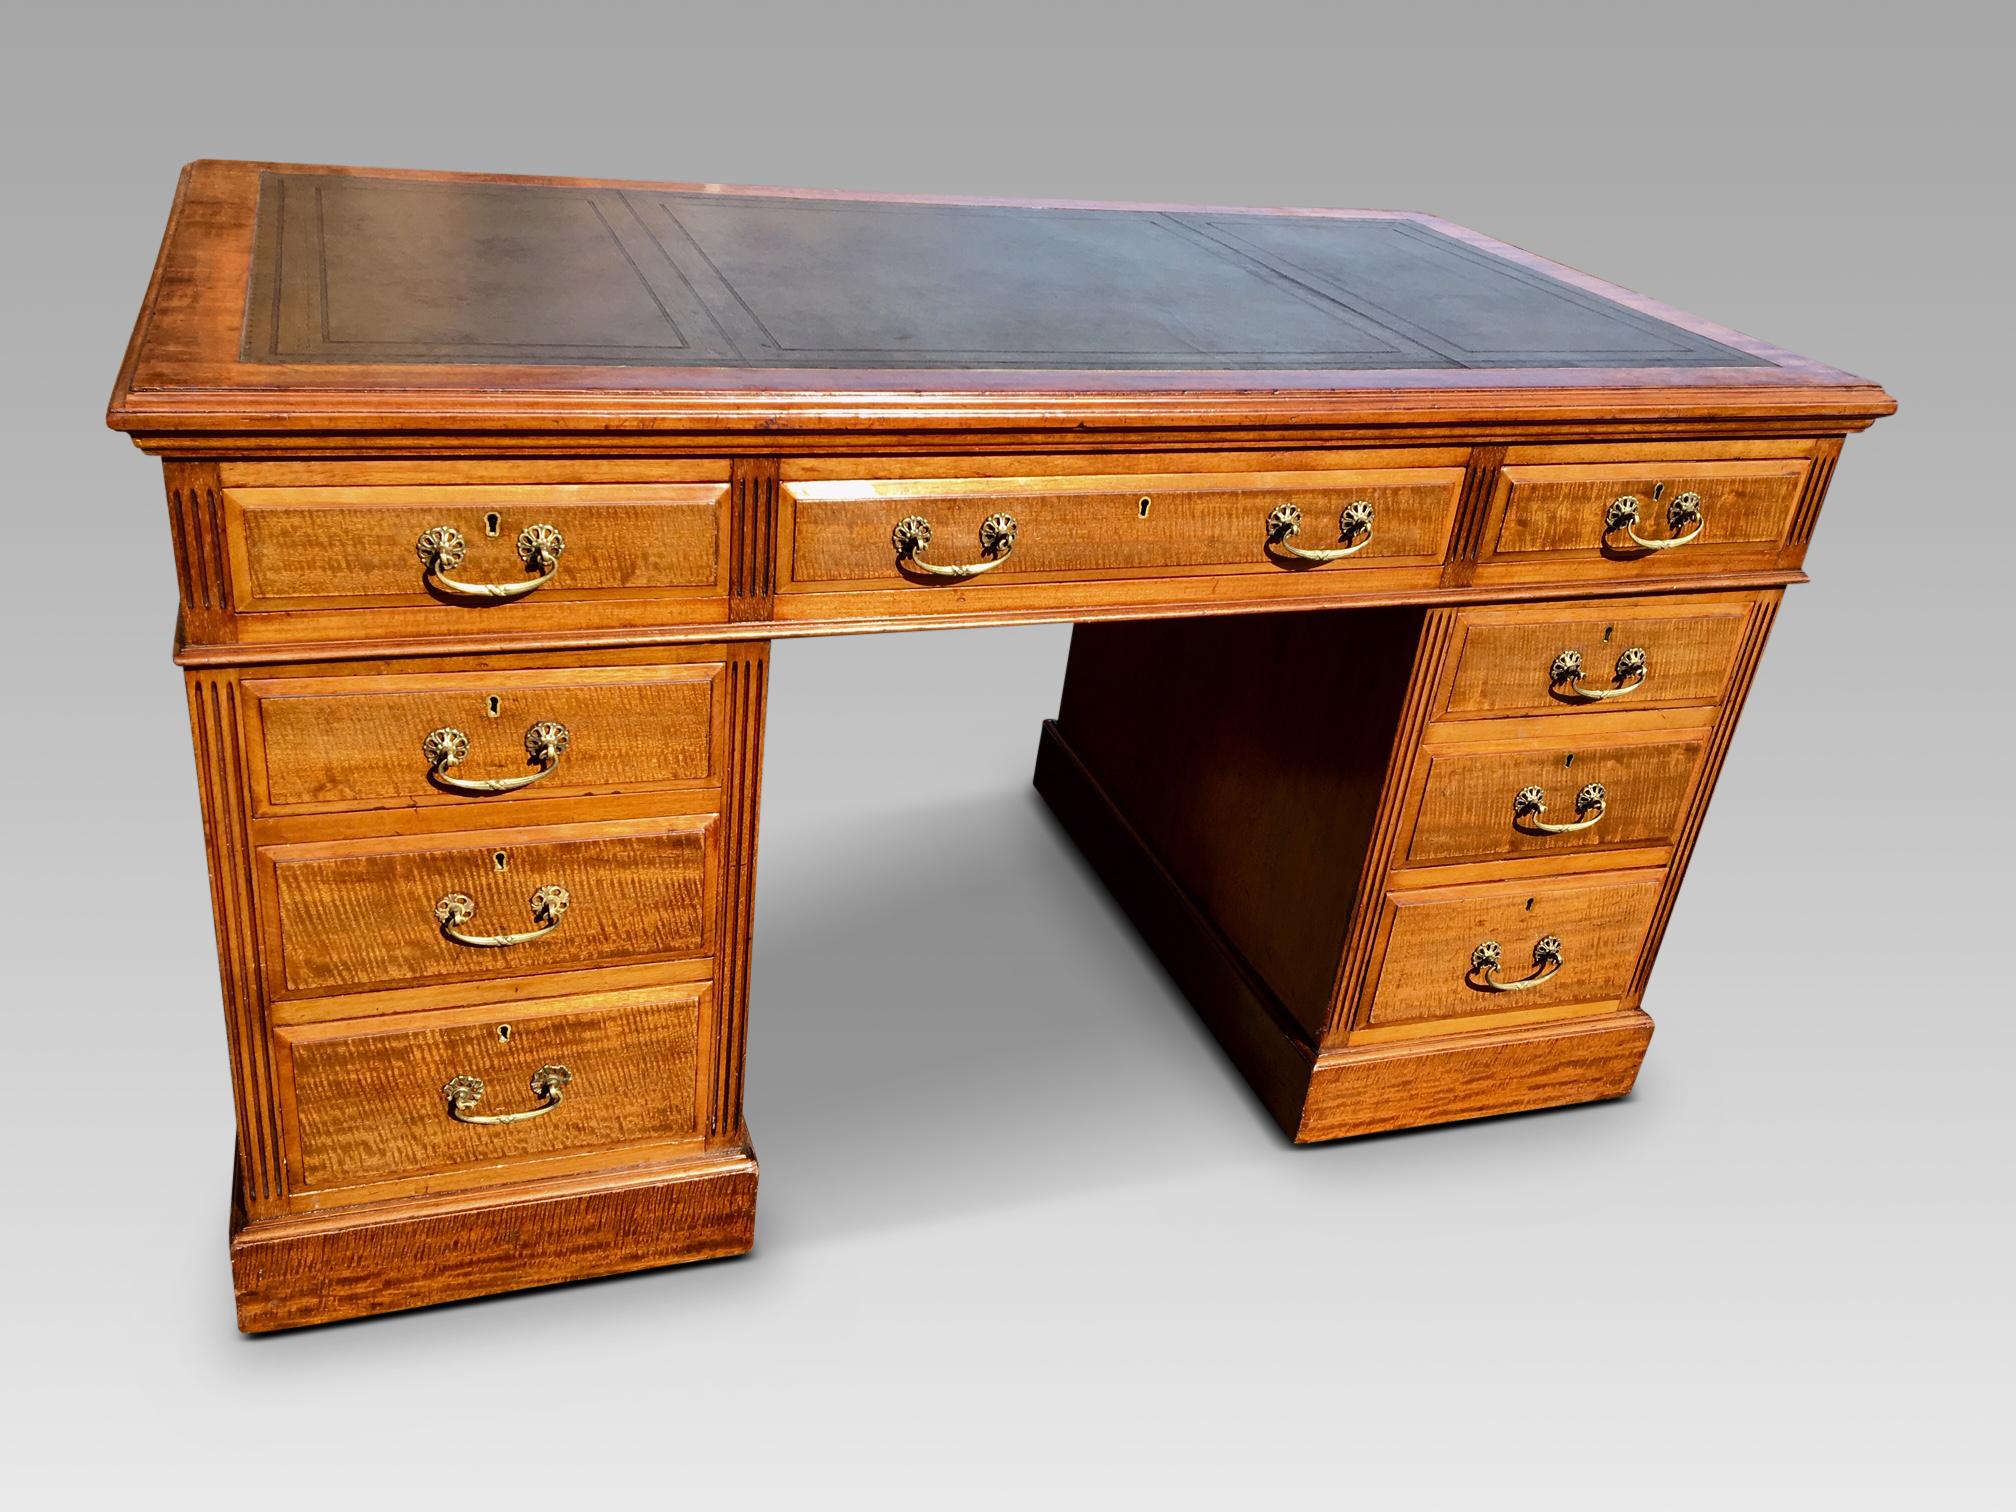 Fine quality English writing desk in clean and bright original condition, circa 1890.
This delightful desk retains its original polish, with a good mellow colour and patina.The 9 drawers run smoothly, are solidly made with their original attractive